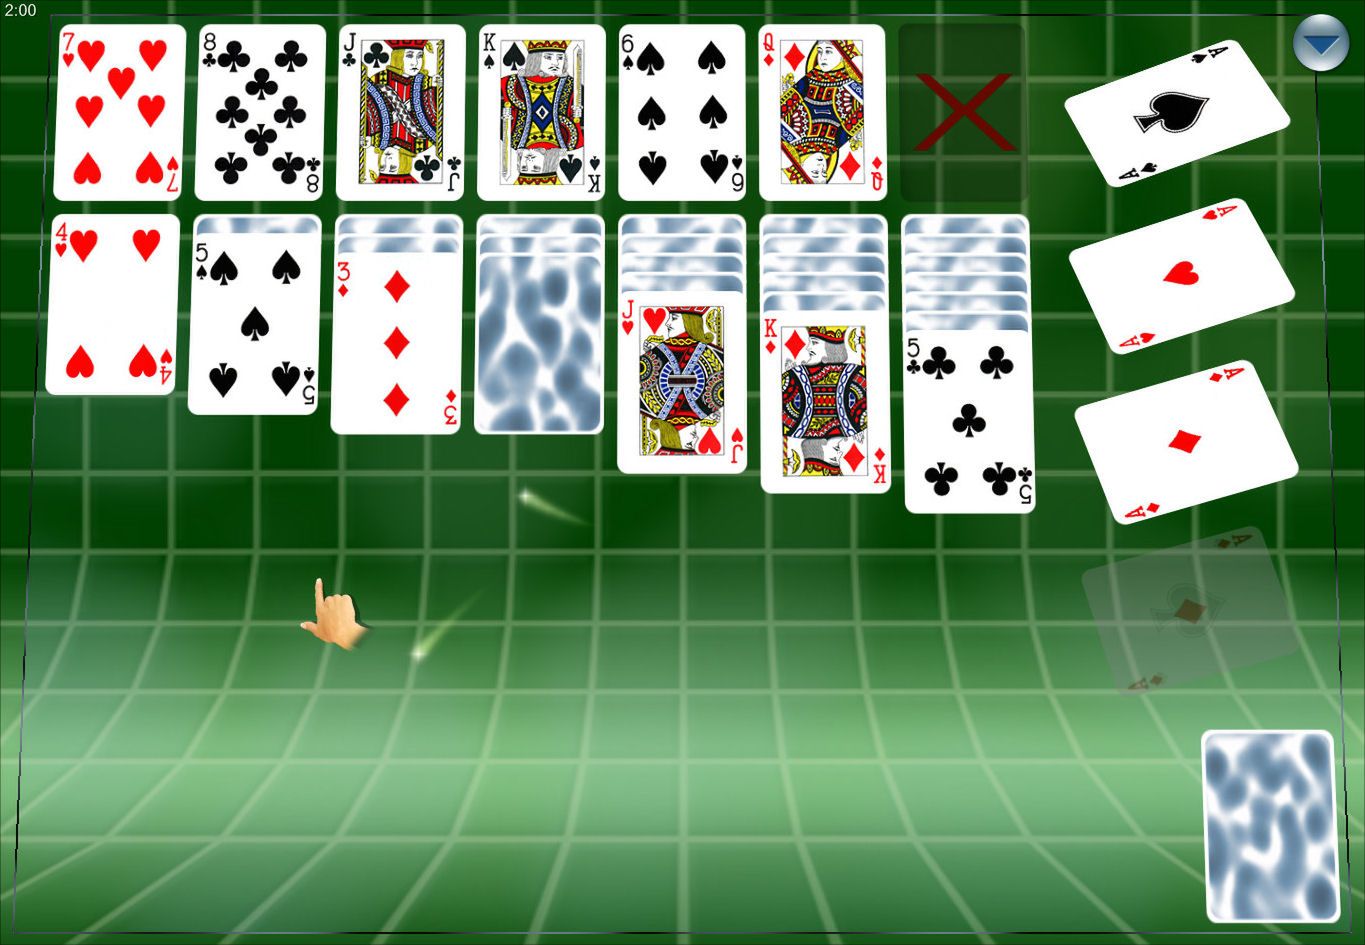 klondike solitaire forever cards are blank in windows 10